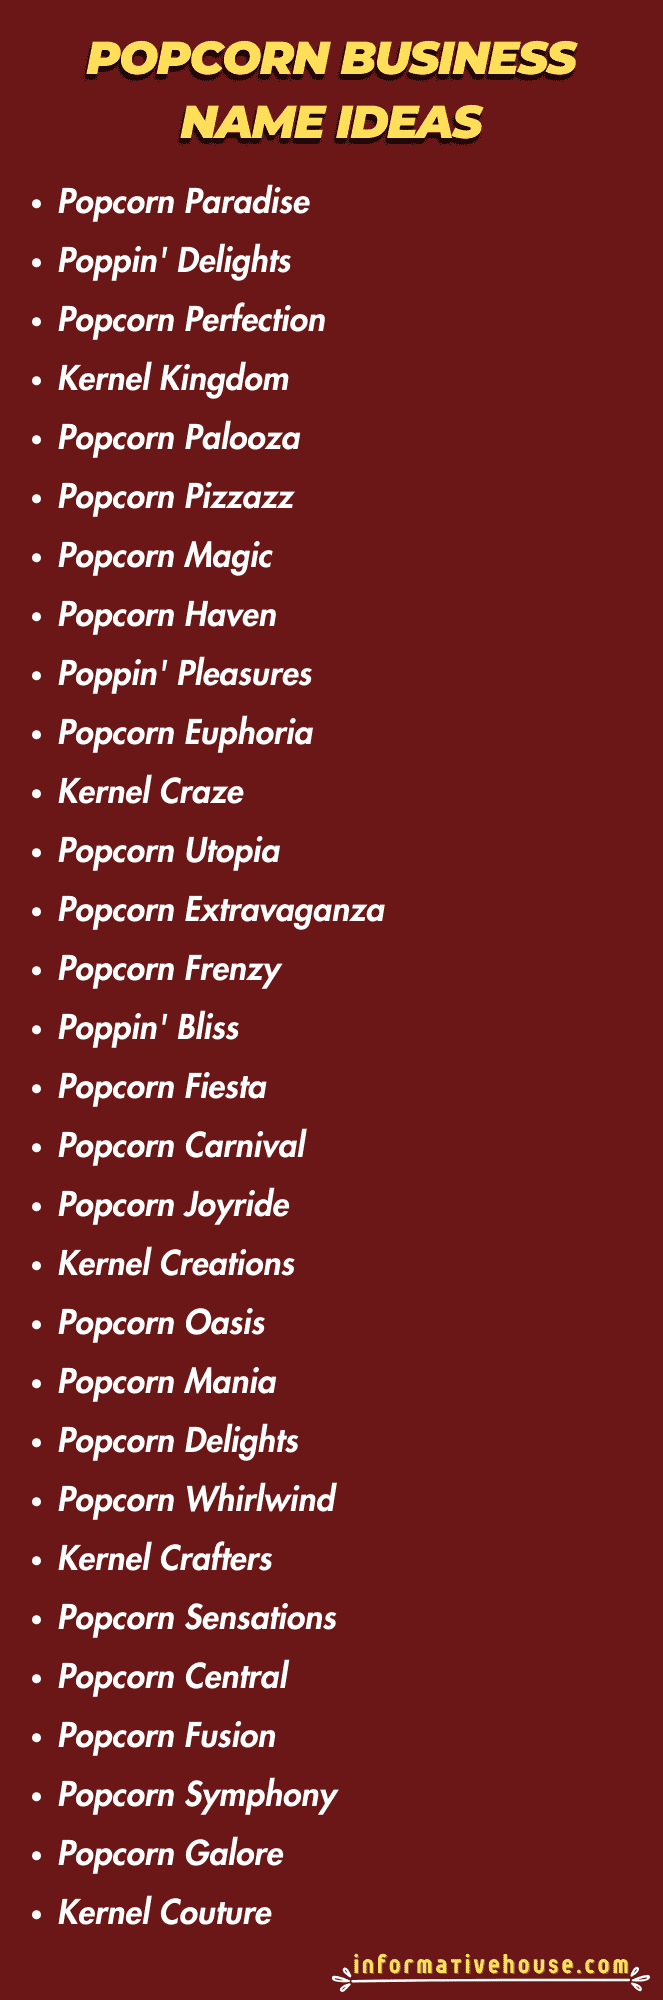 Popcorn Business Name Ideas for a Popcorn Business startup